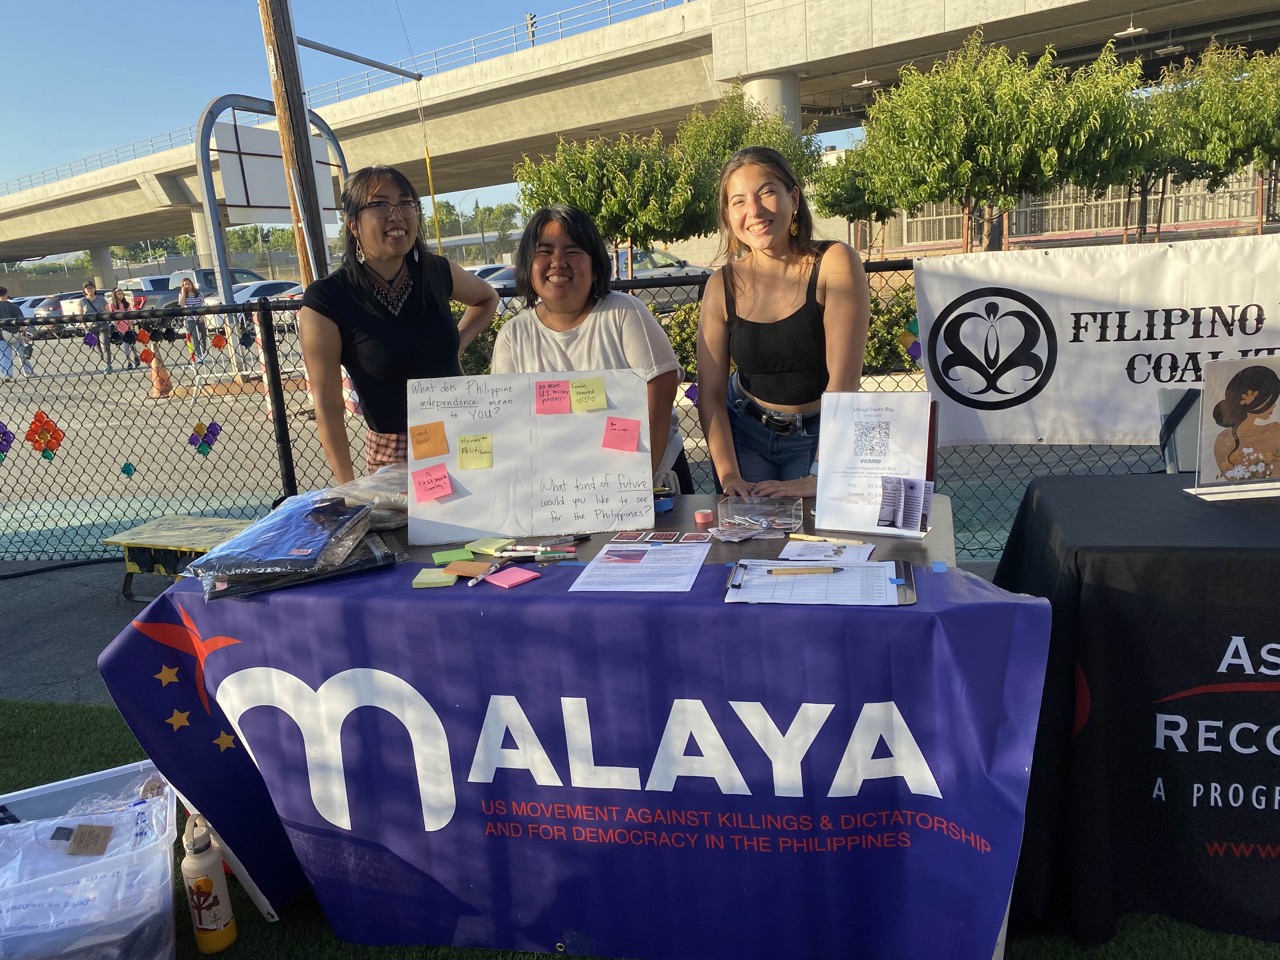 3 malaya members standing at a malaya table at the event